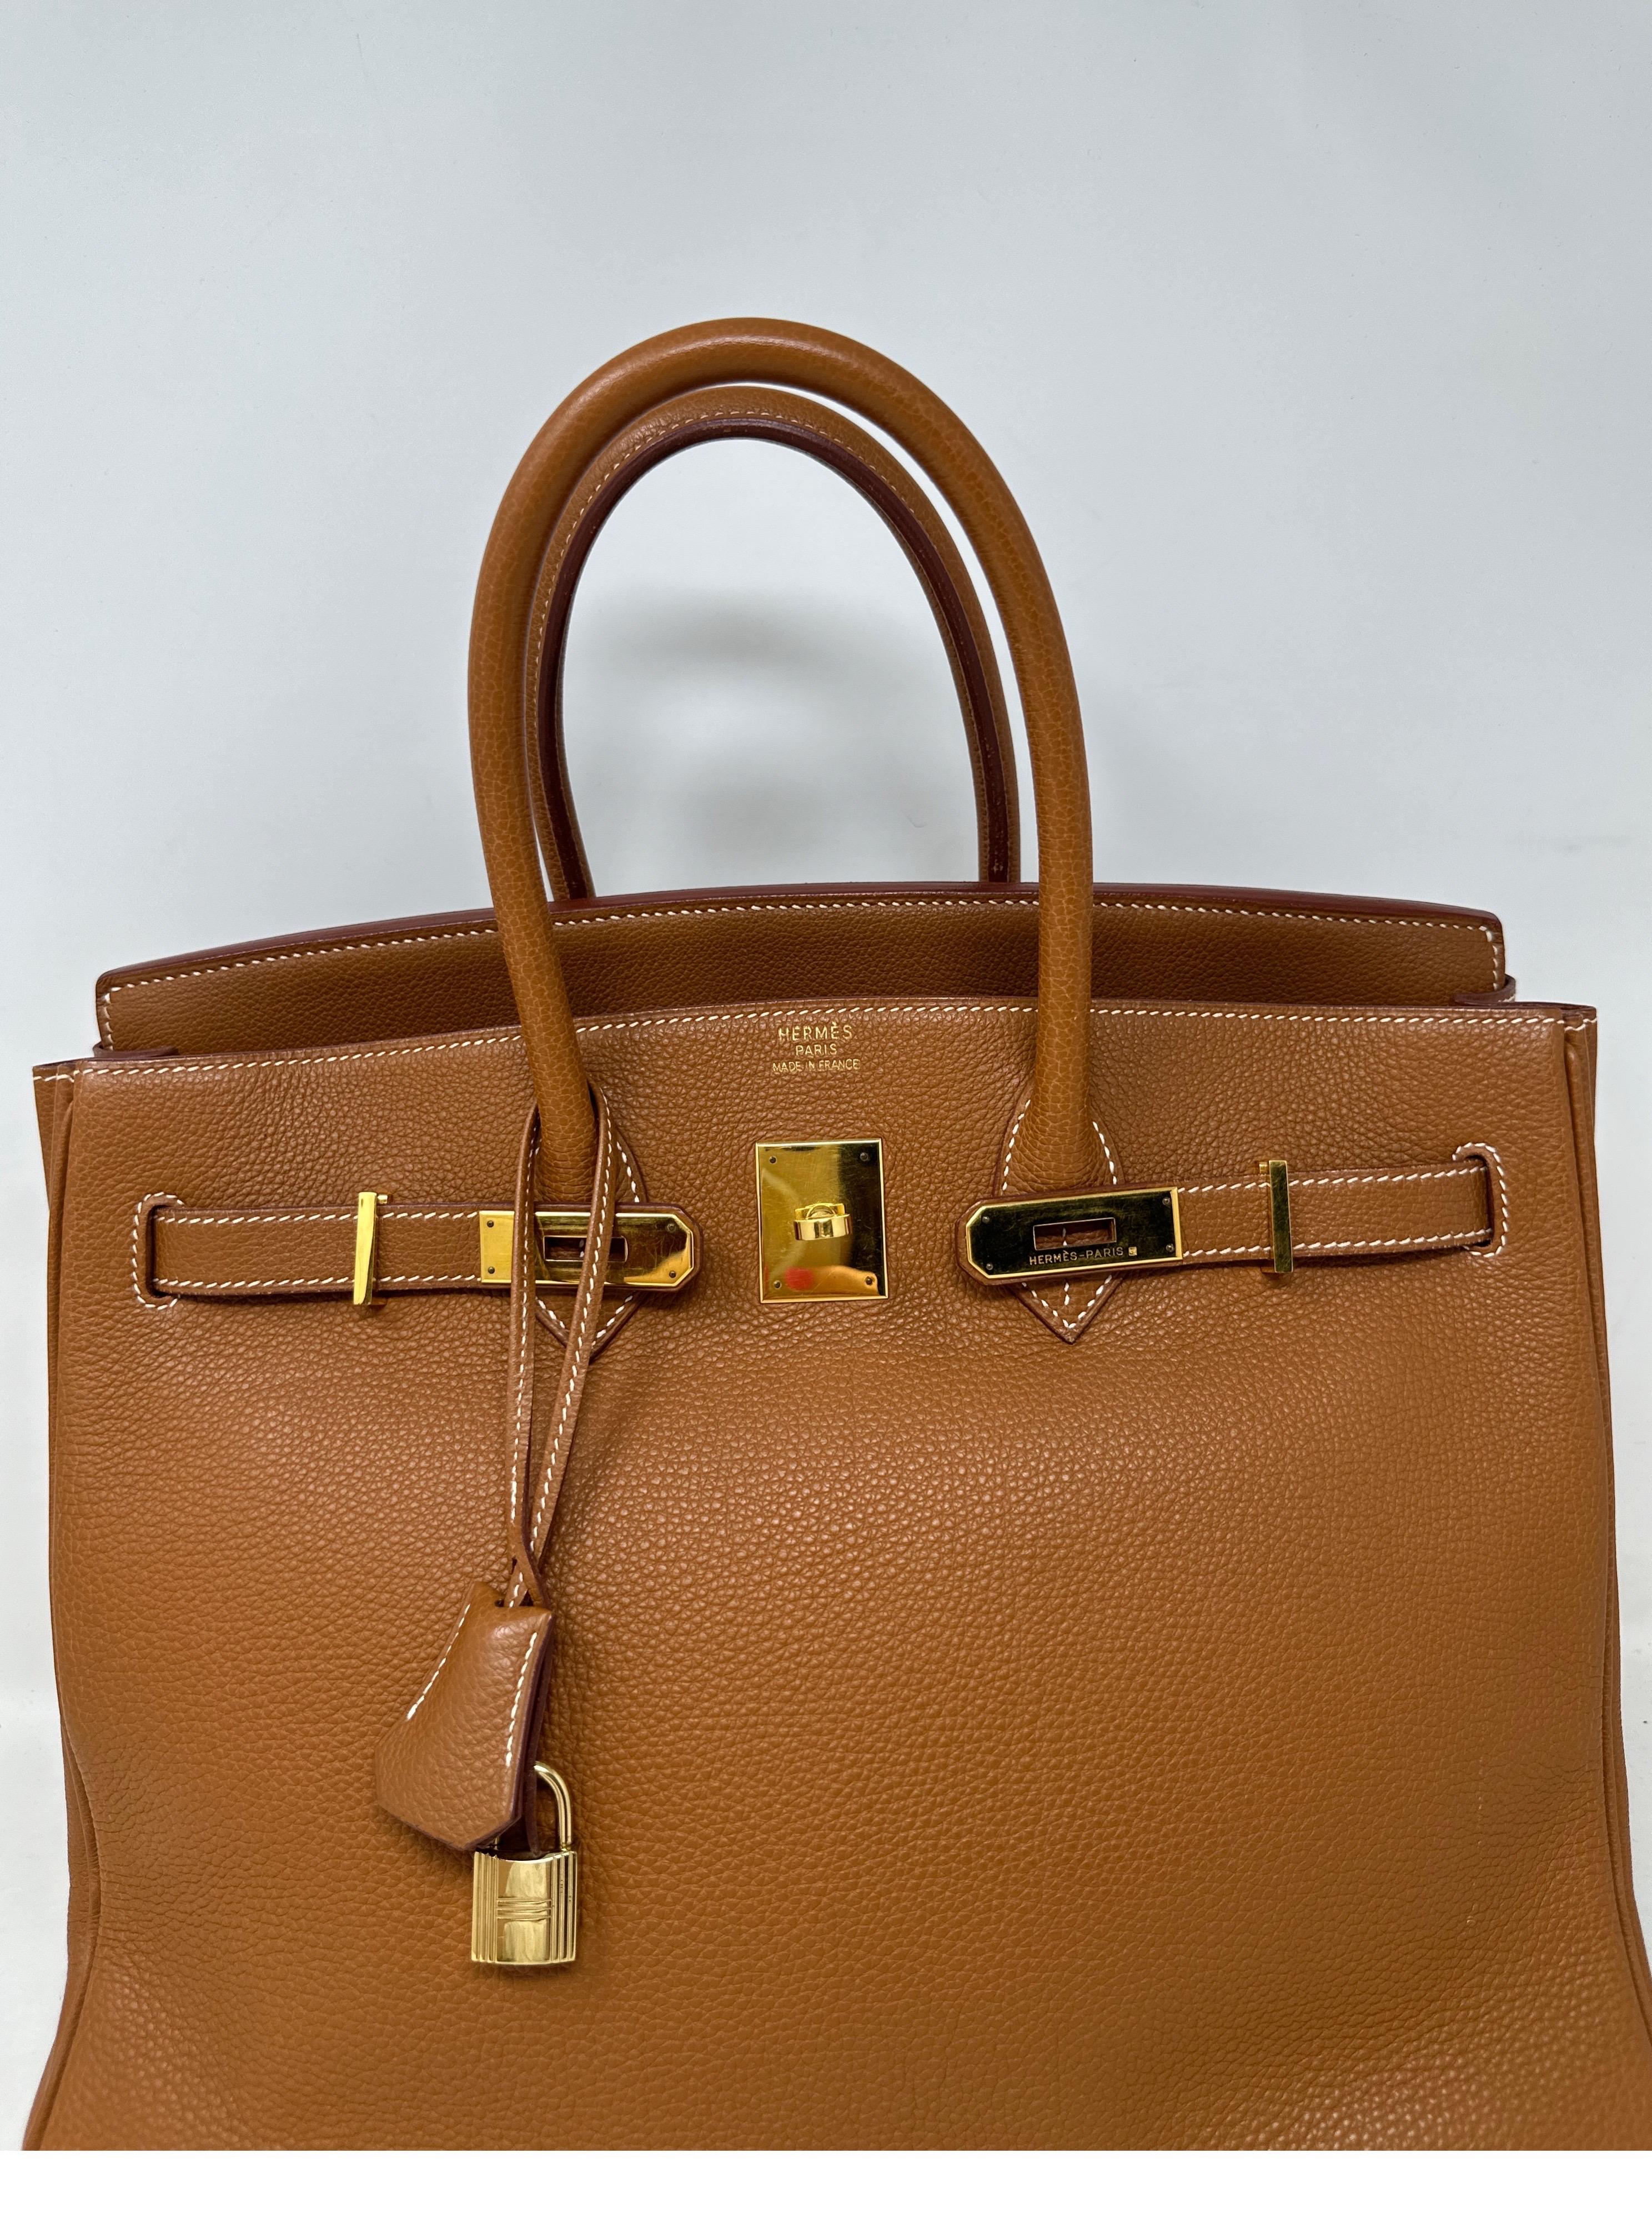 Hermes Gold Birkin 35 Bag  In Good Condition For Sale In Athens, GA